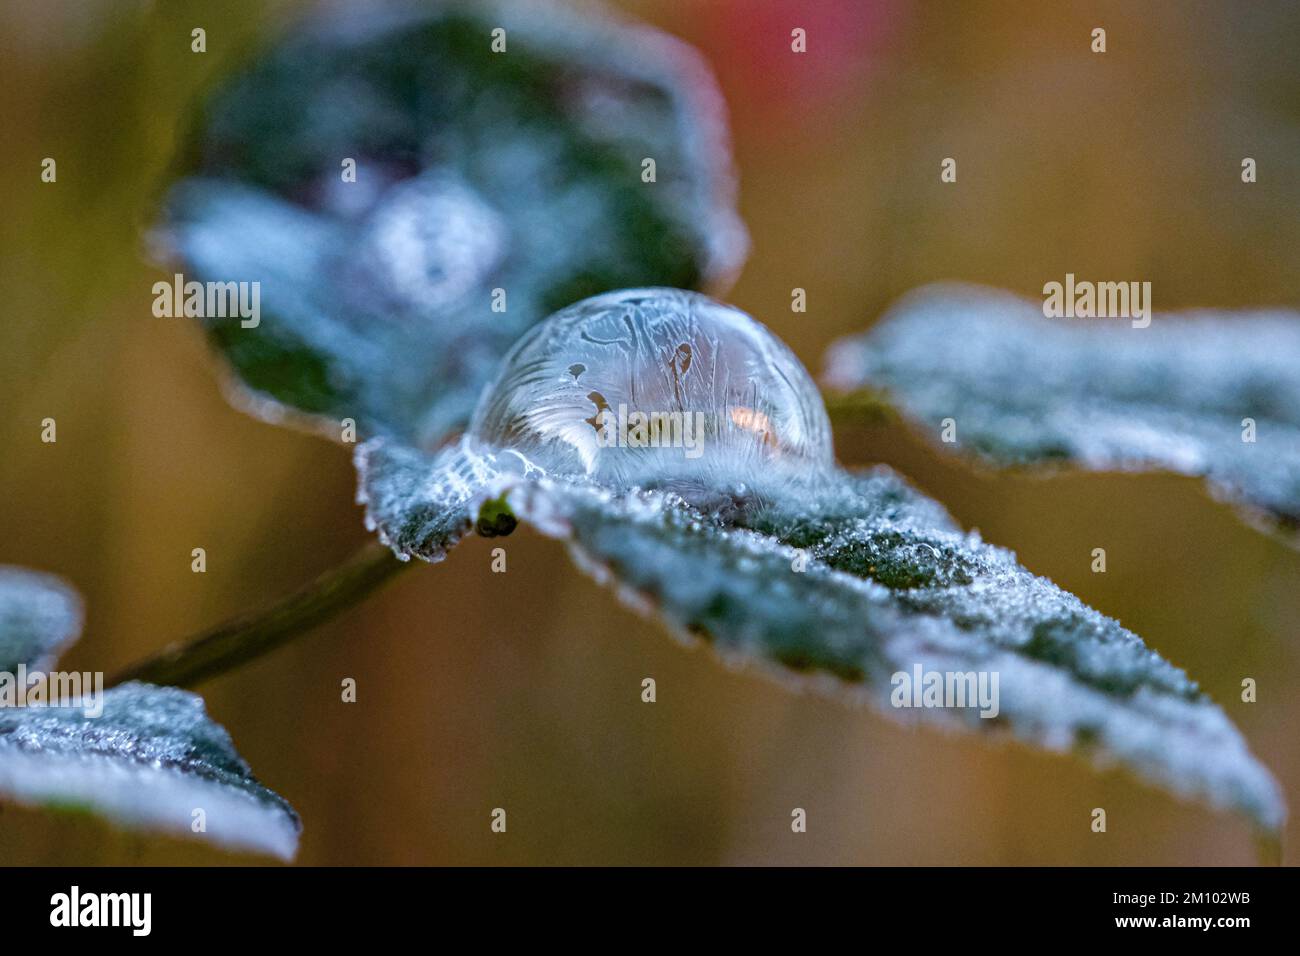 Wadebridge, Cornwall, UK. 9th December 2022. UK Weather. Another cold and frosty start to the day on the North Cornwall coast.  An ice bubble covered with frosty patterns freezes over on top of a rose leaf. Credit Simon Maycock / Alamy Live News. Stock Photo